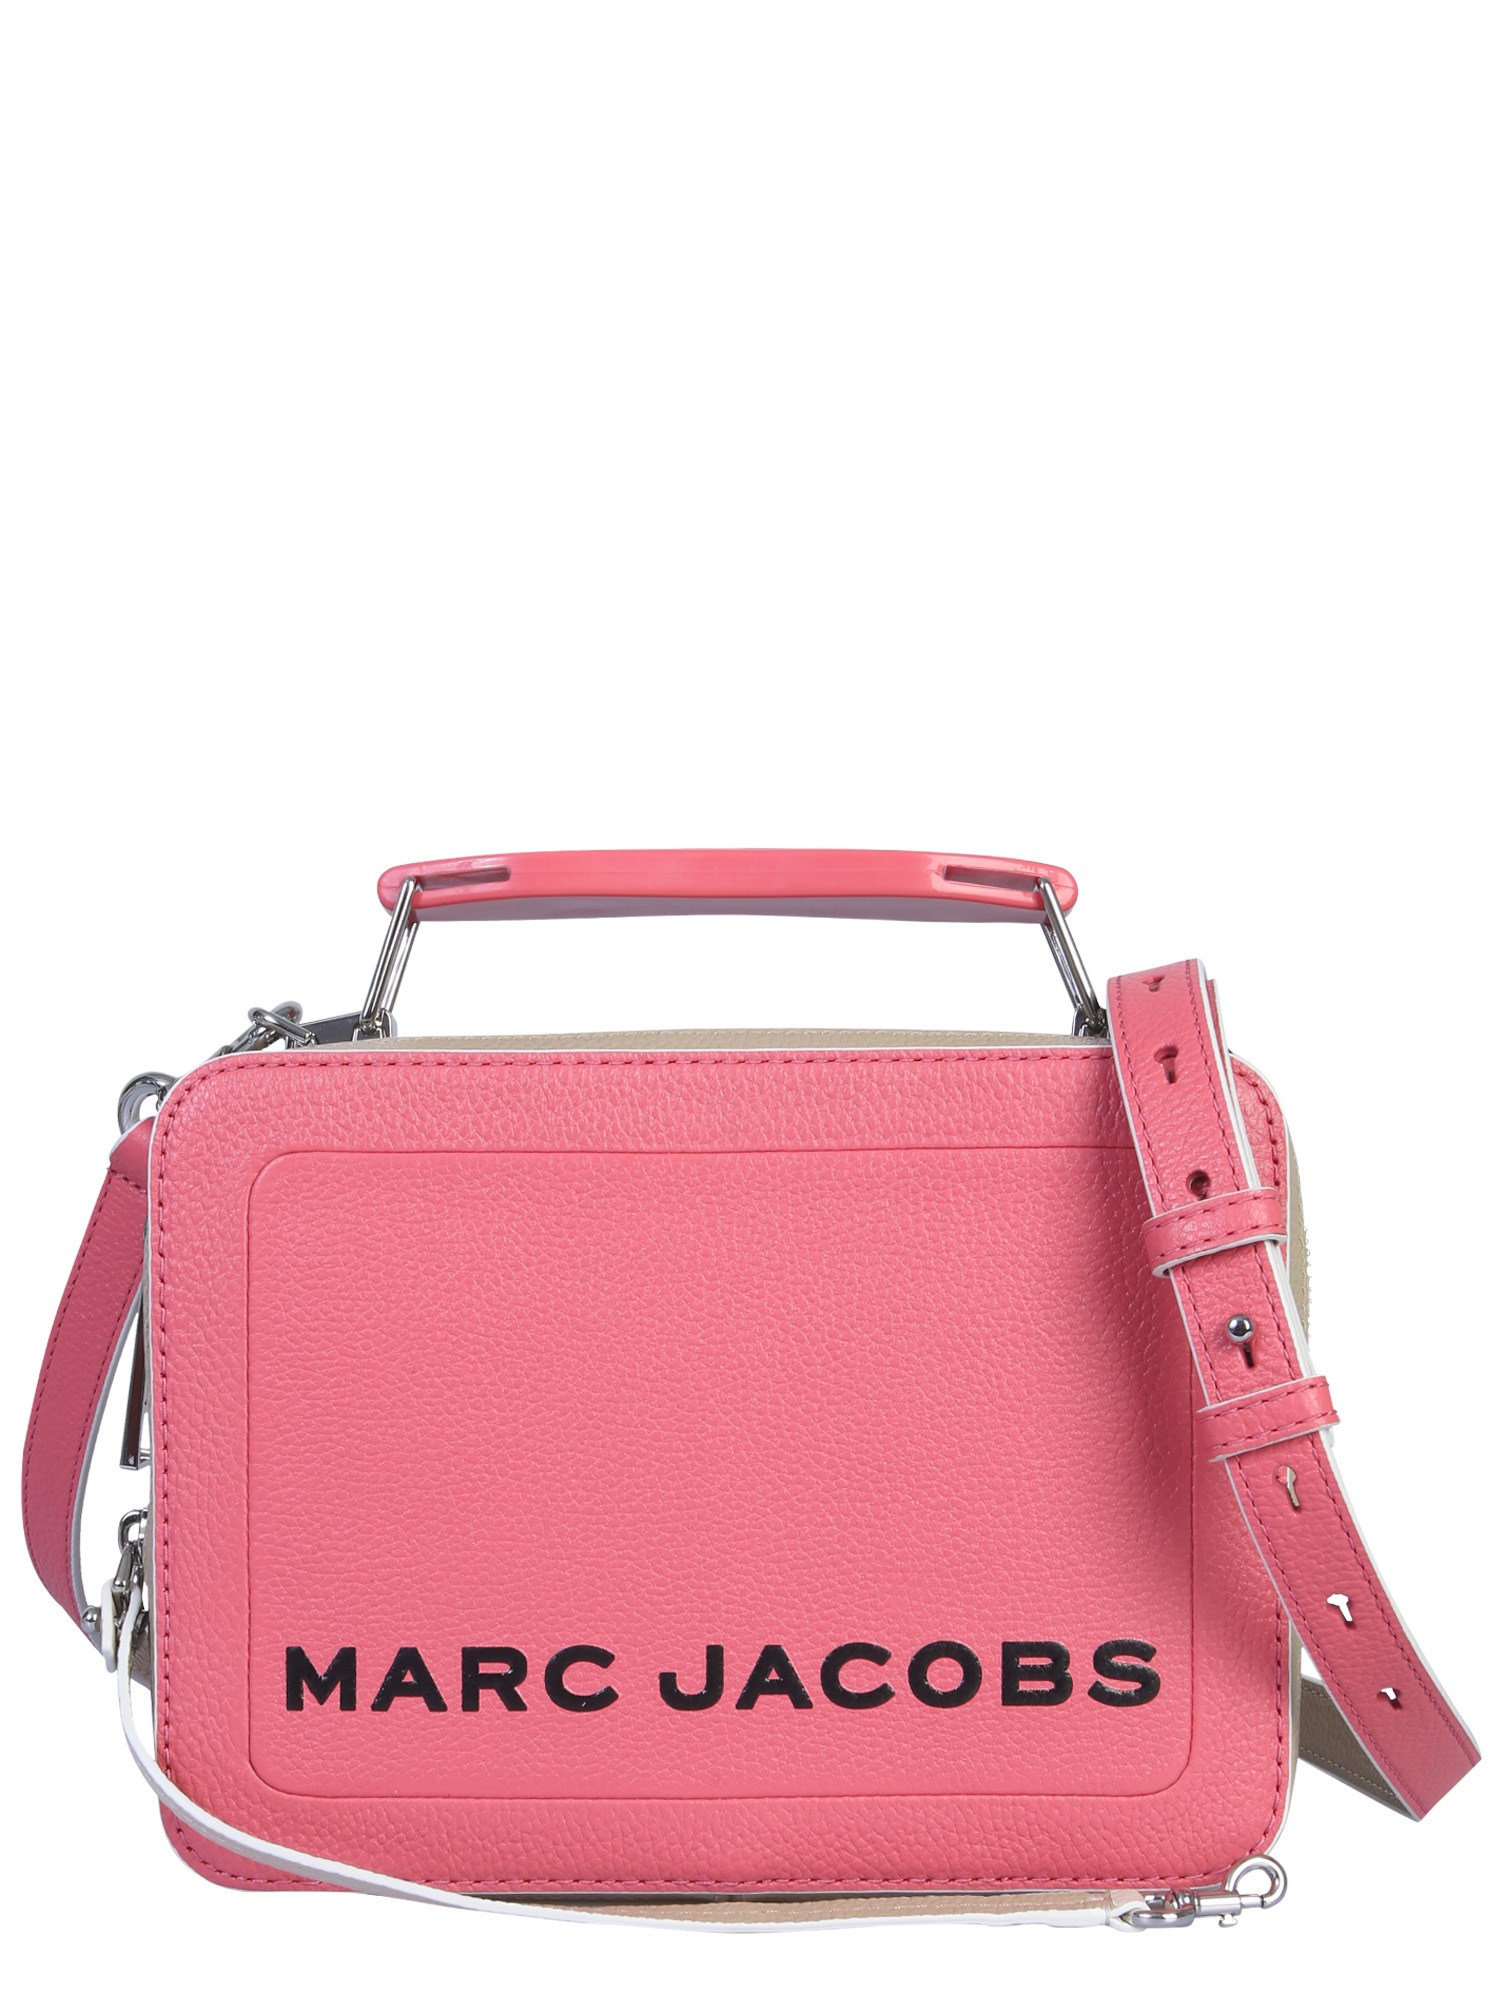 MARC JACOBS THE COLORBLOCK TEXTURED BOX BAG,174379